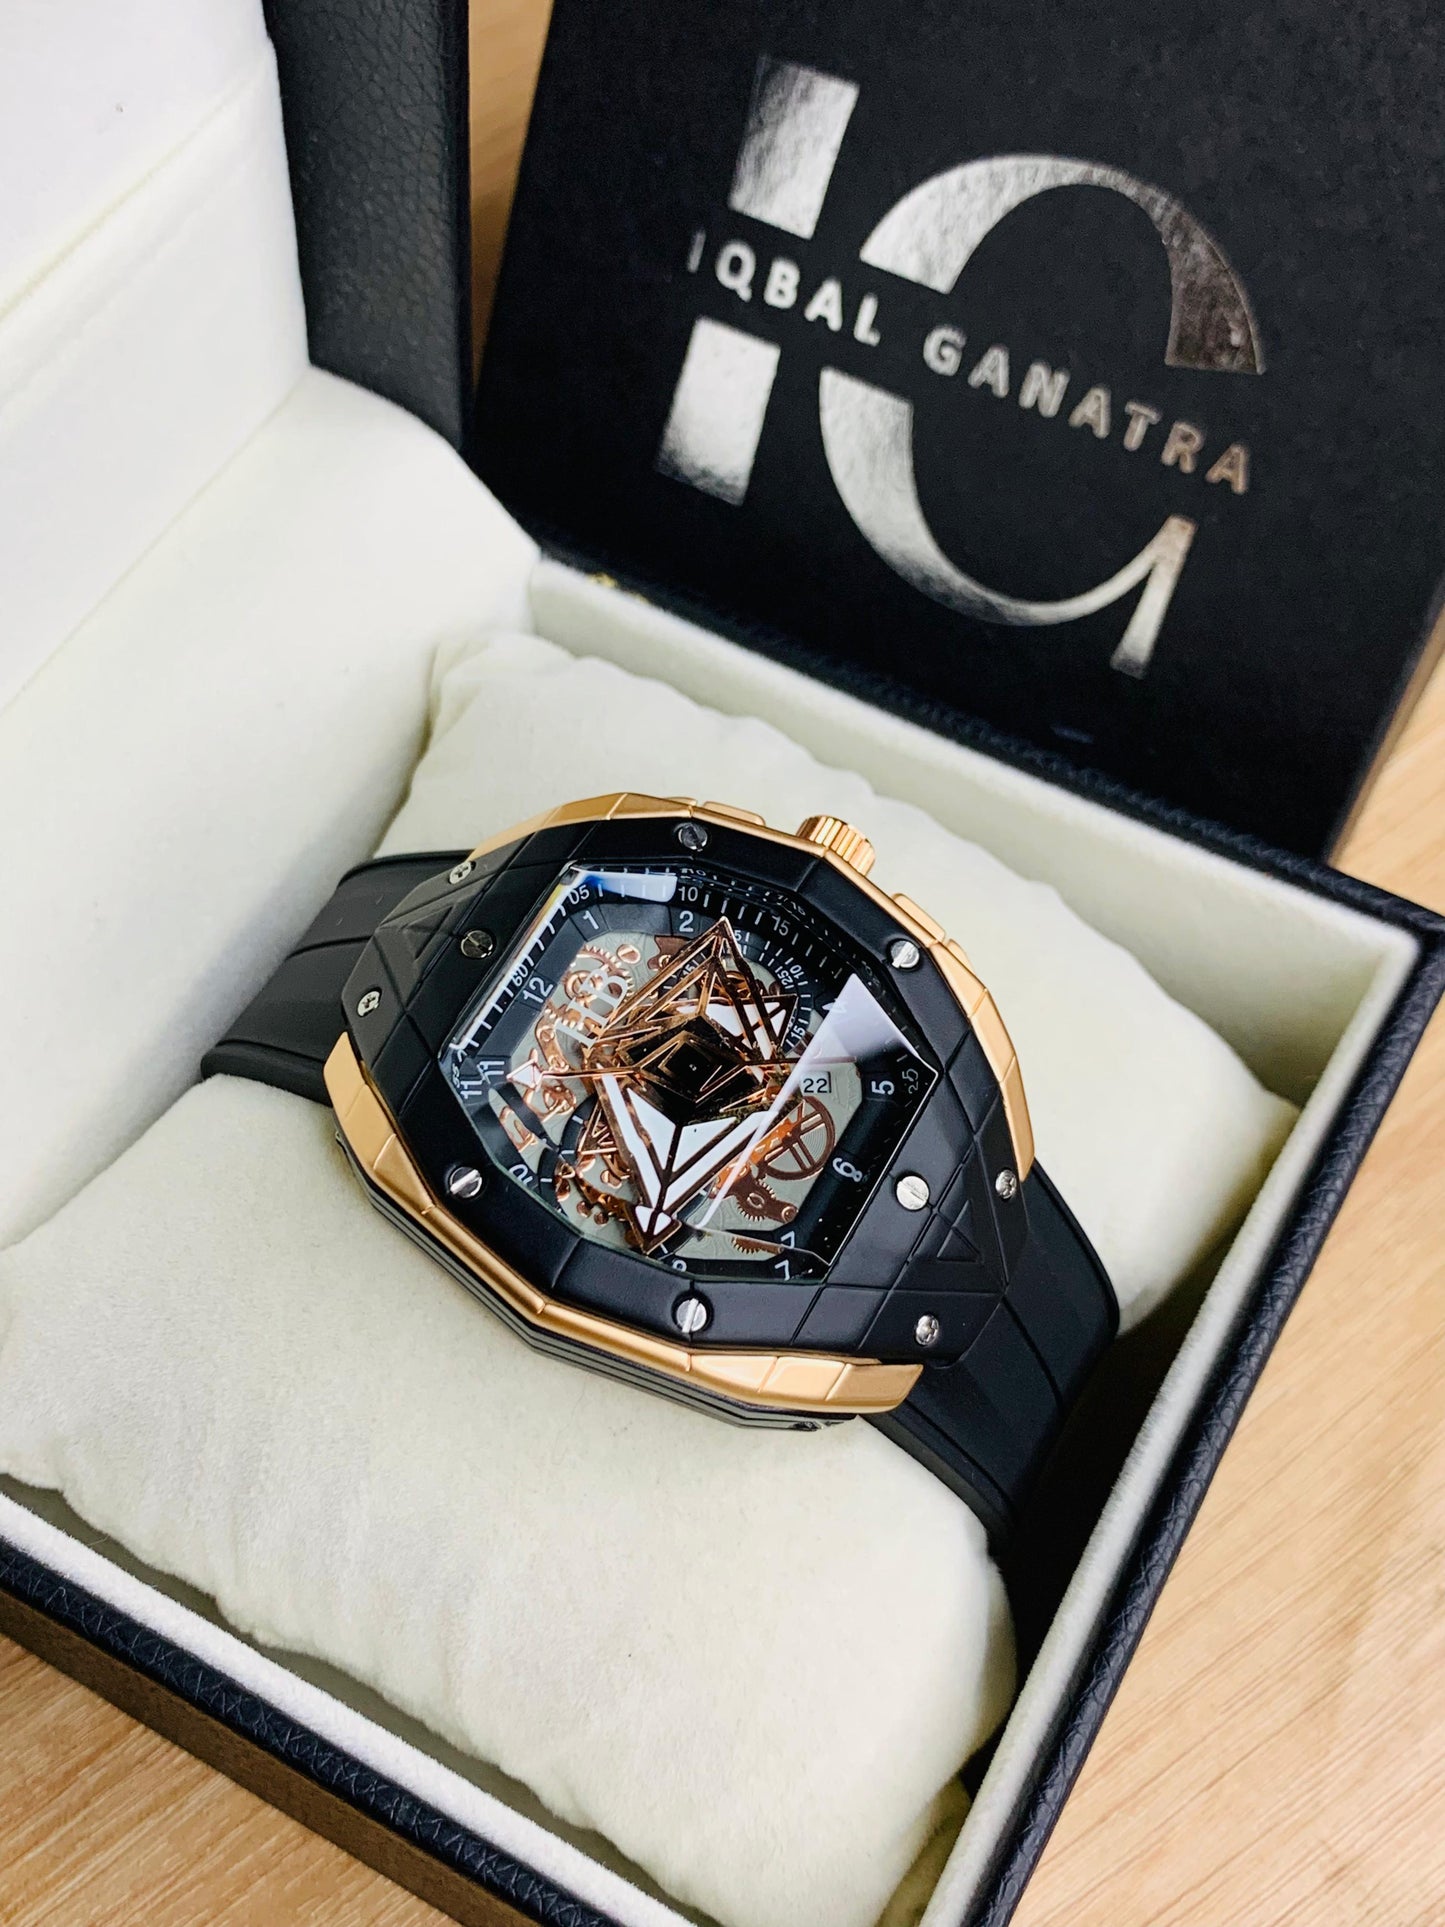 HB Limited Edition (Copper Black)